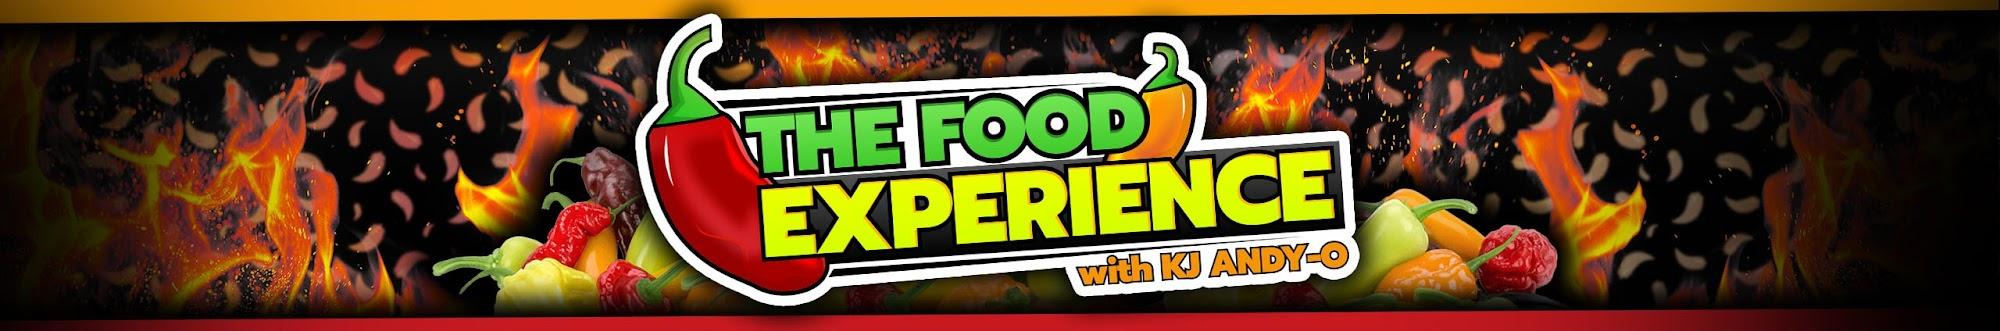 The Food Experience